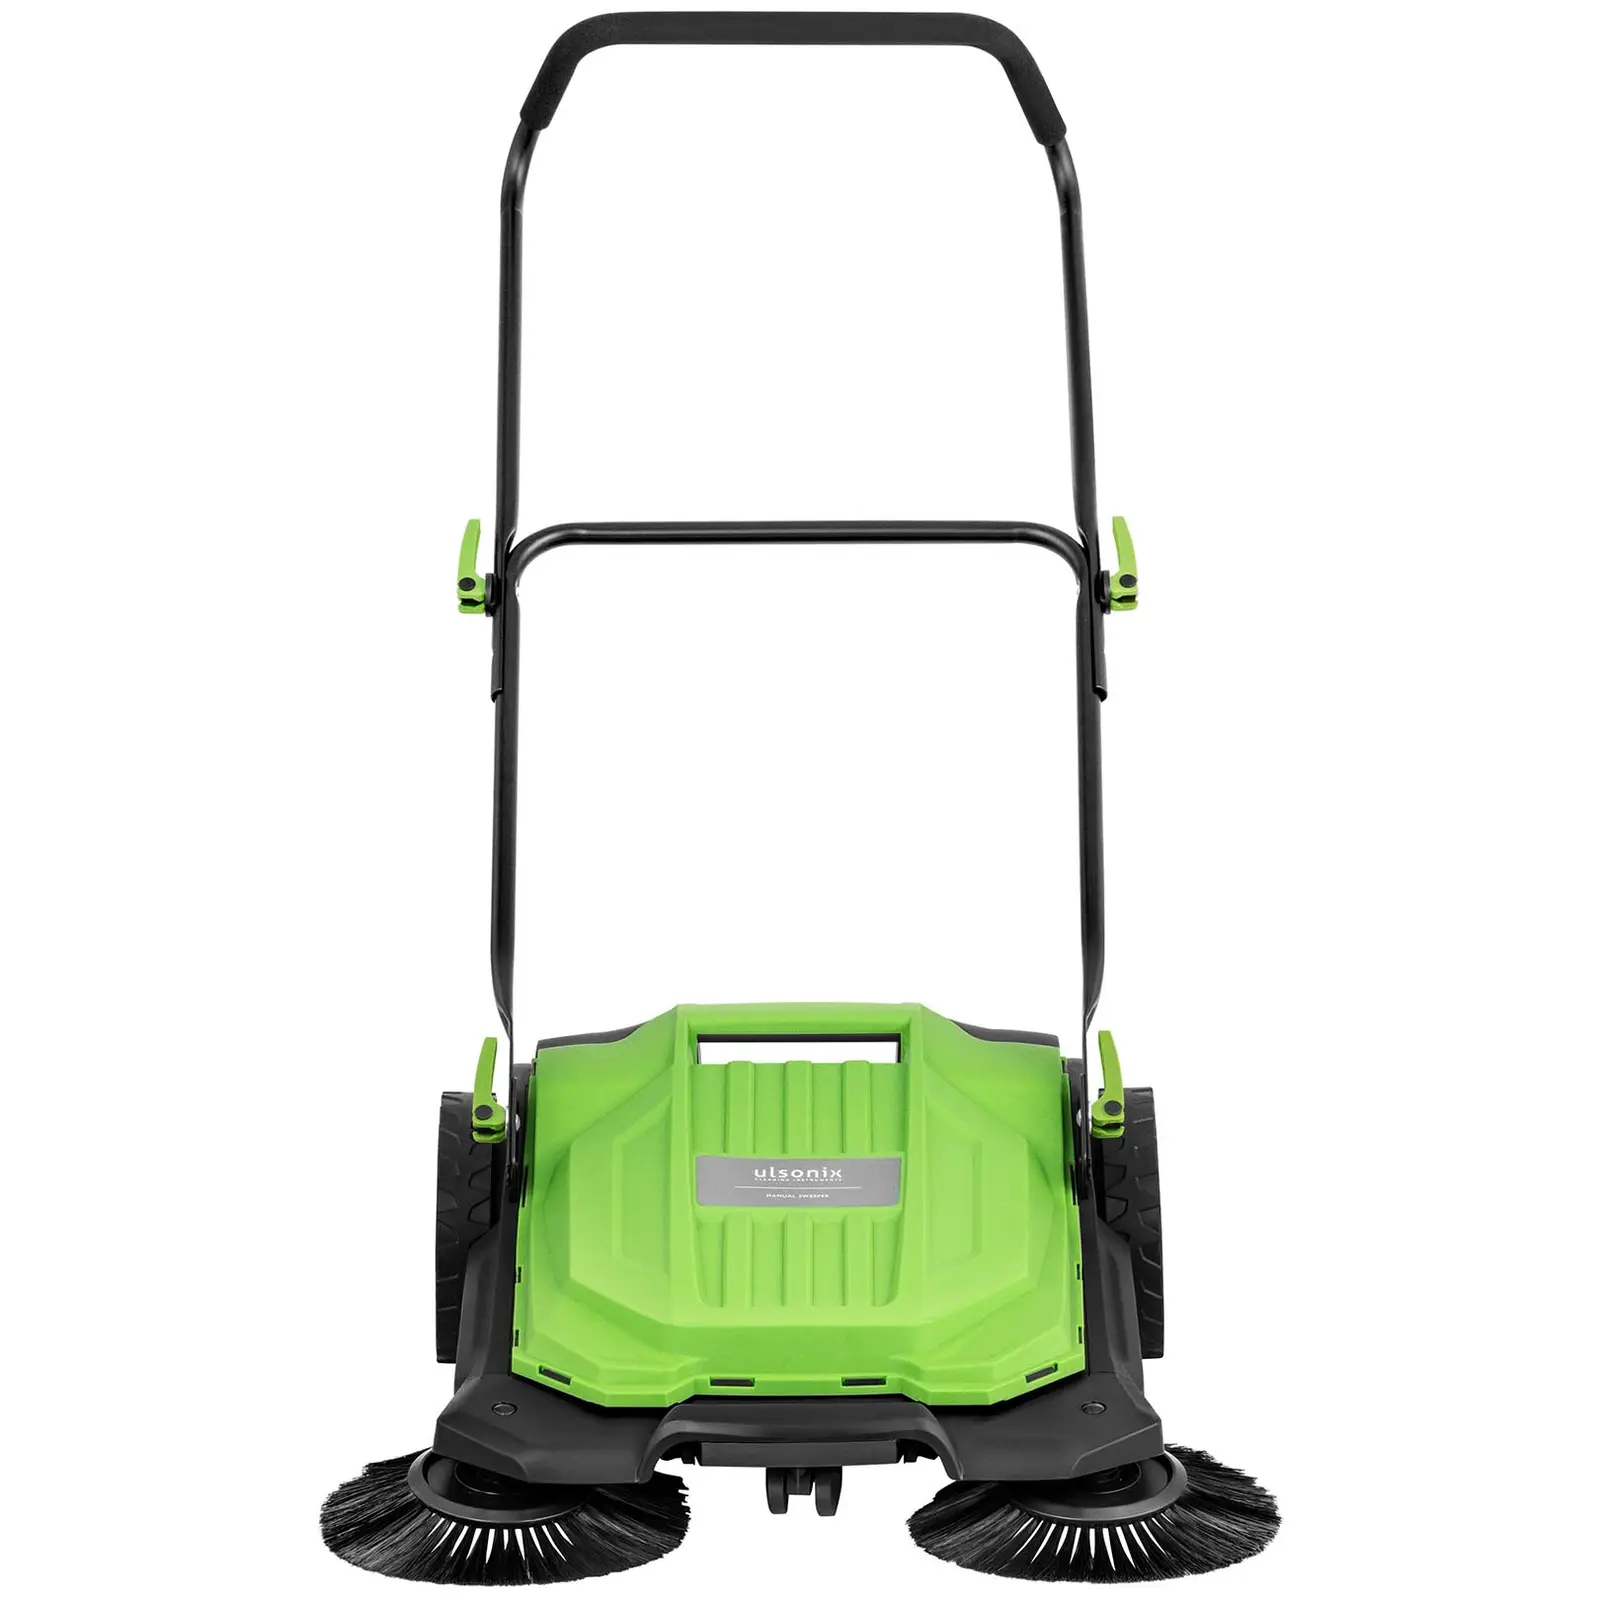 Manual Sweeper - 2 side brushes - 1,400 - 2,300 m²/h